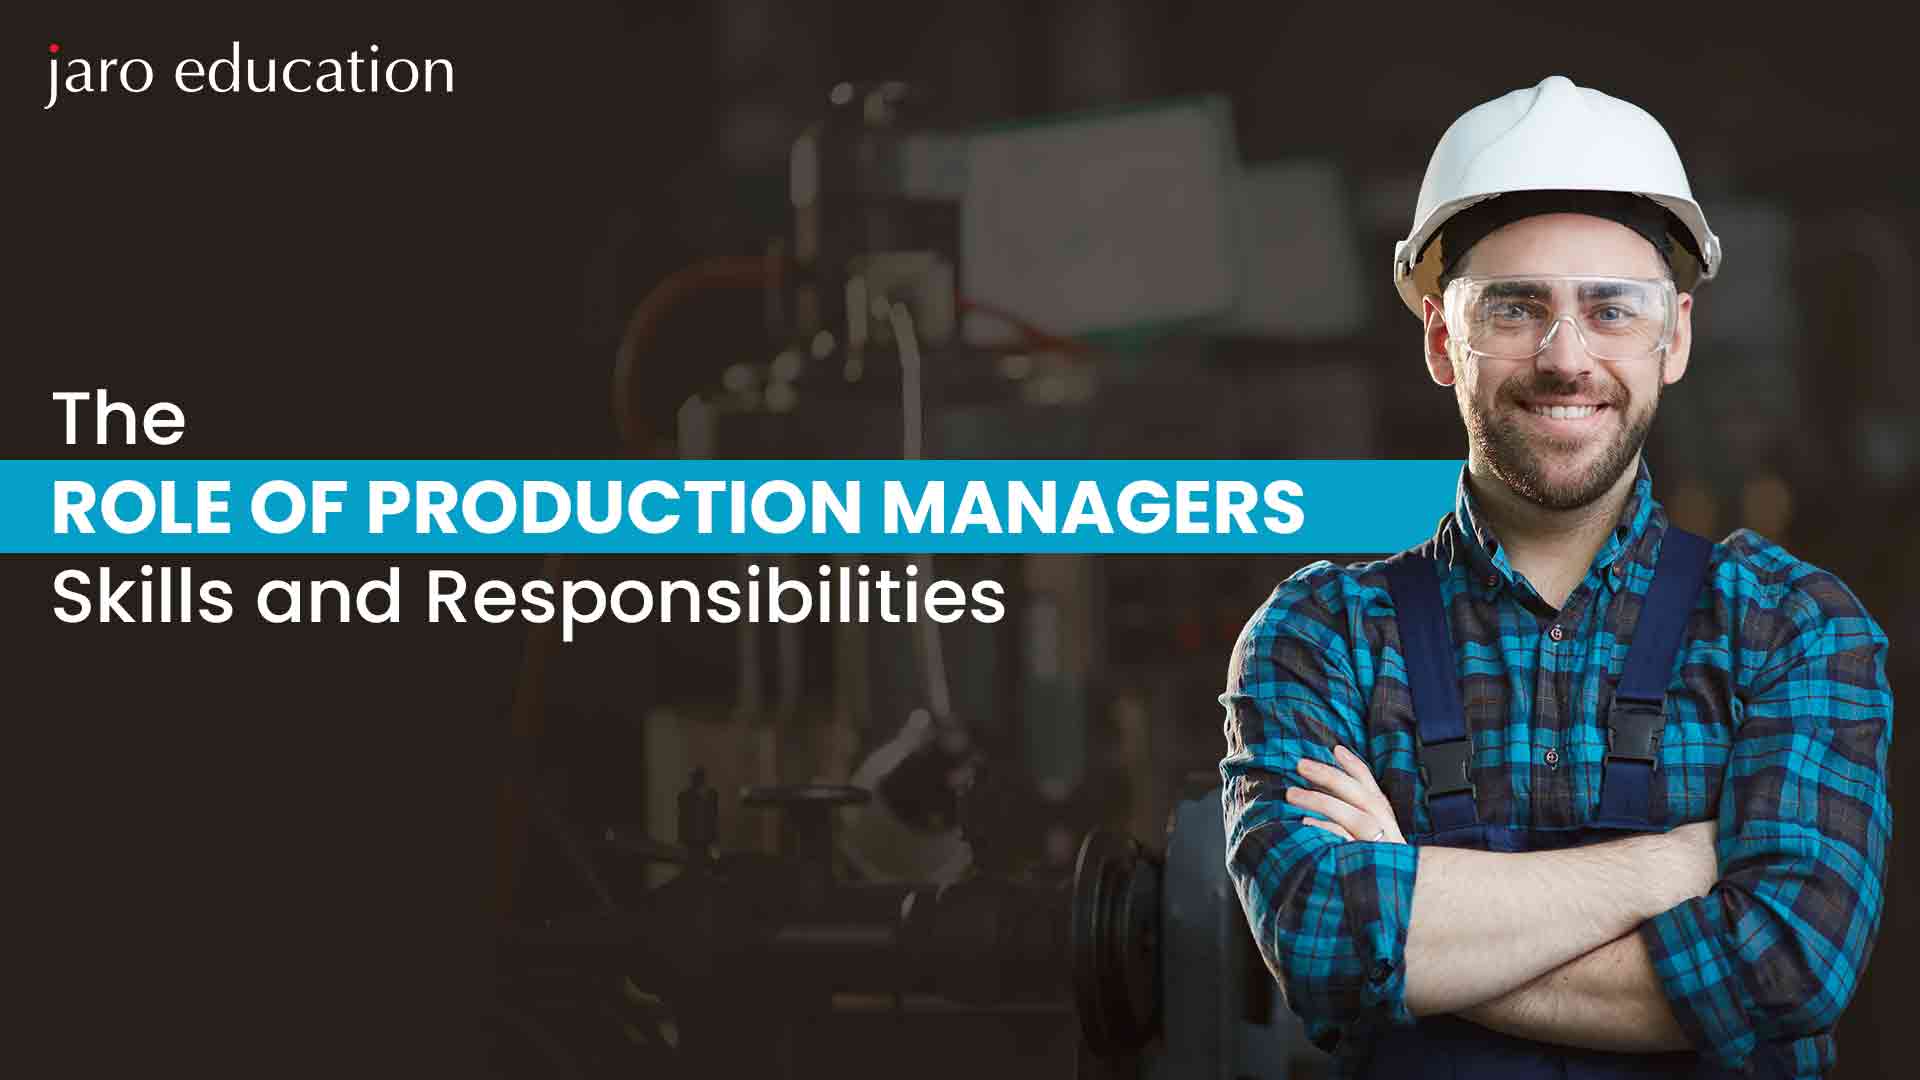 The Role of Production Managers Skills and Responsibilities